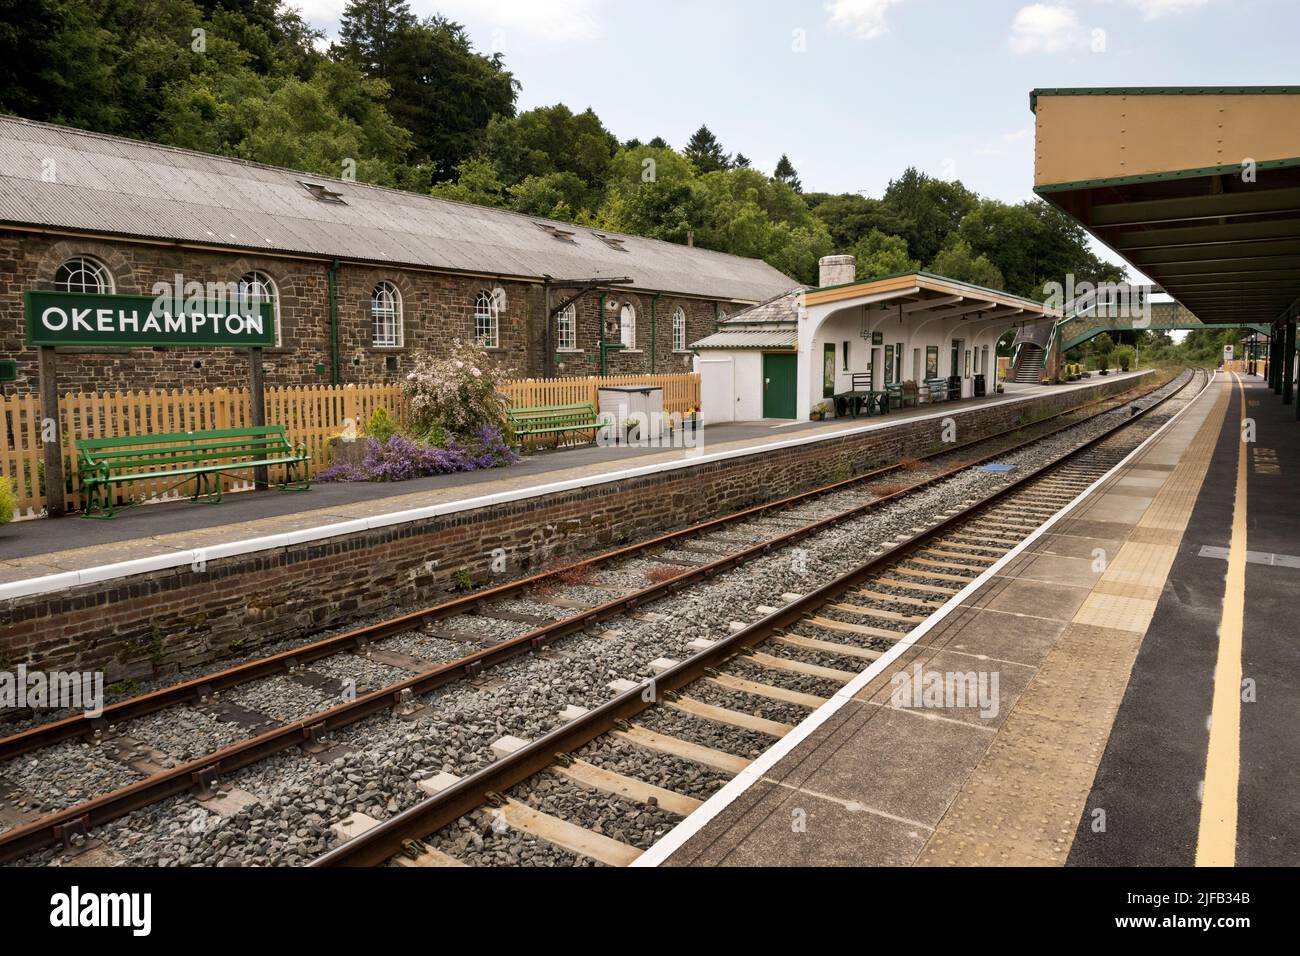 Okehampton Station, Devon. The station was re-opened to regular services in 2021. Stock Photo